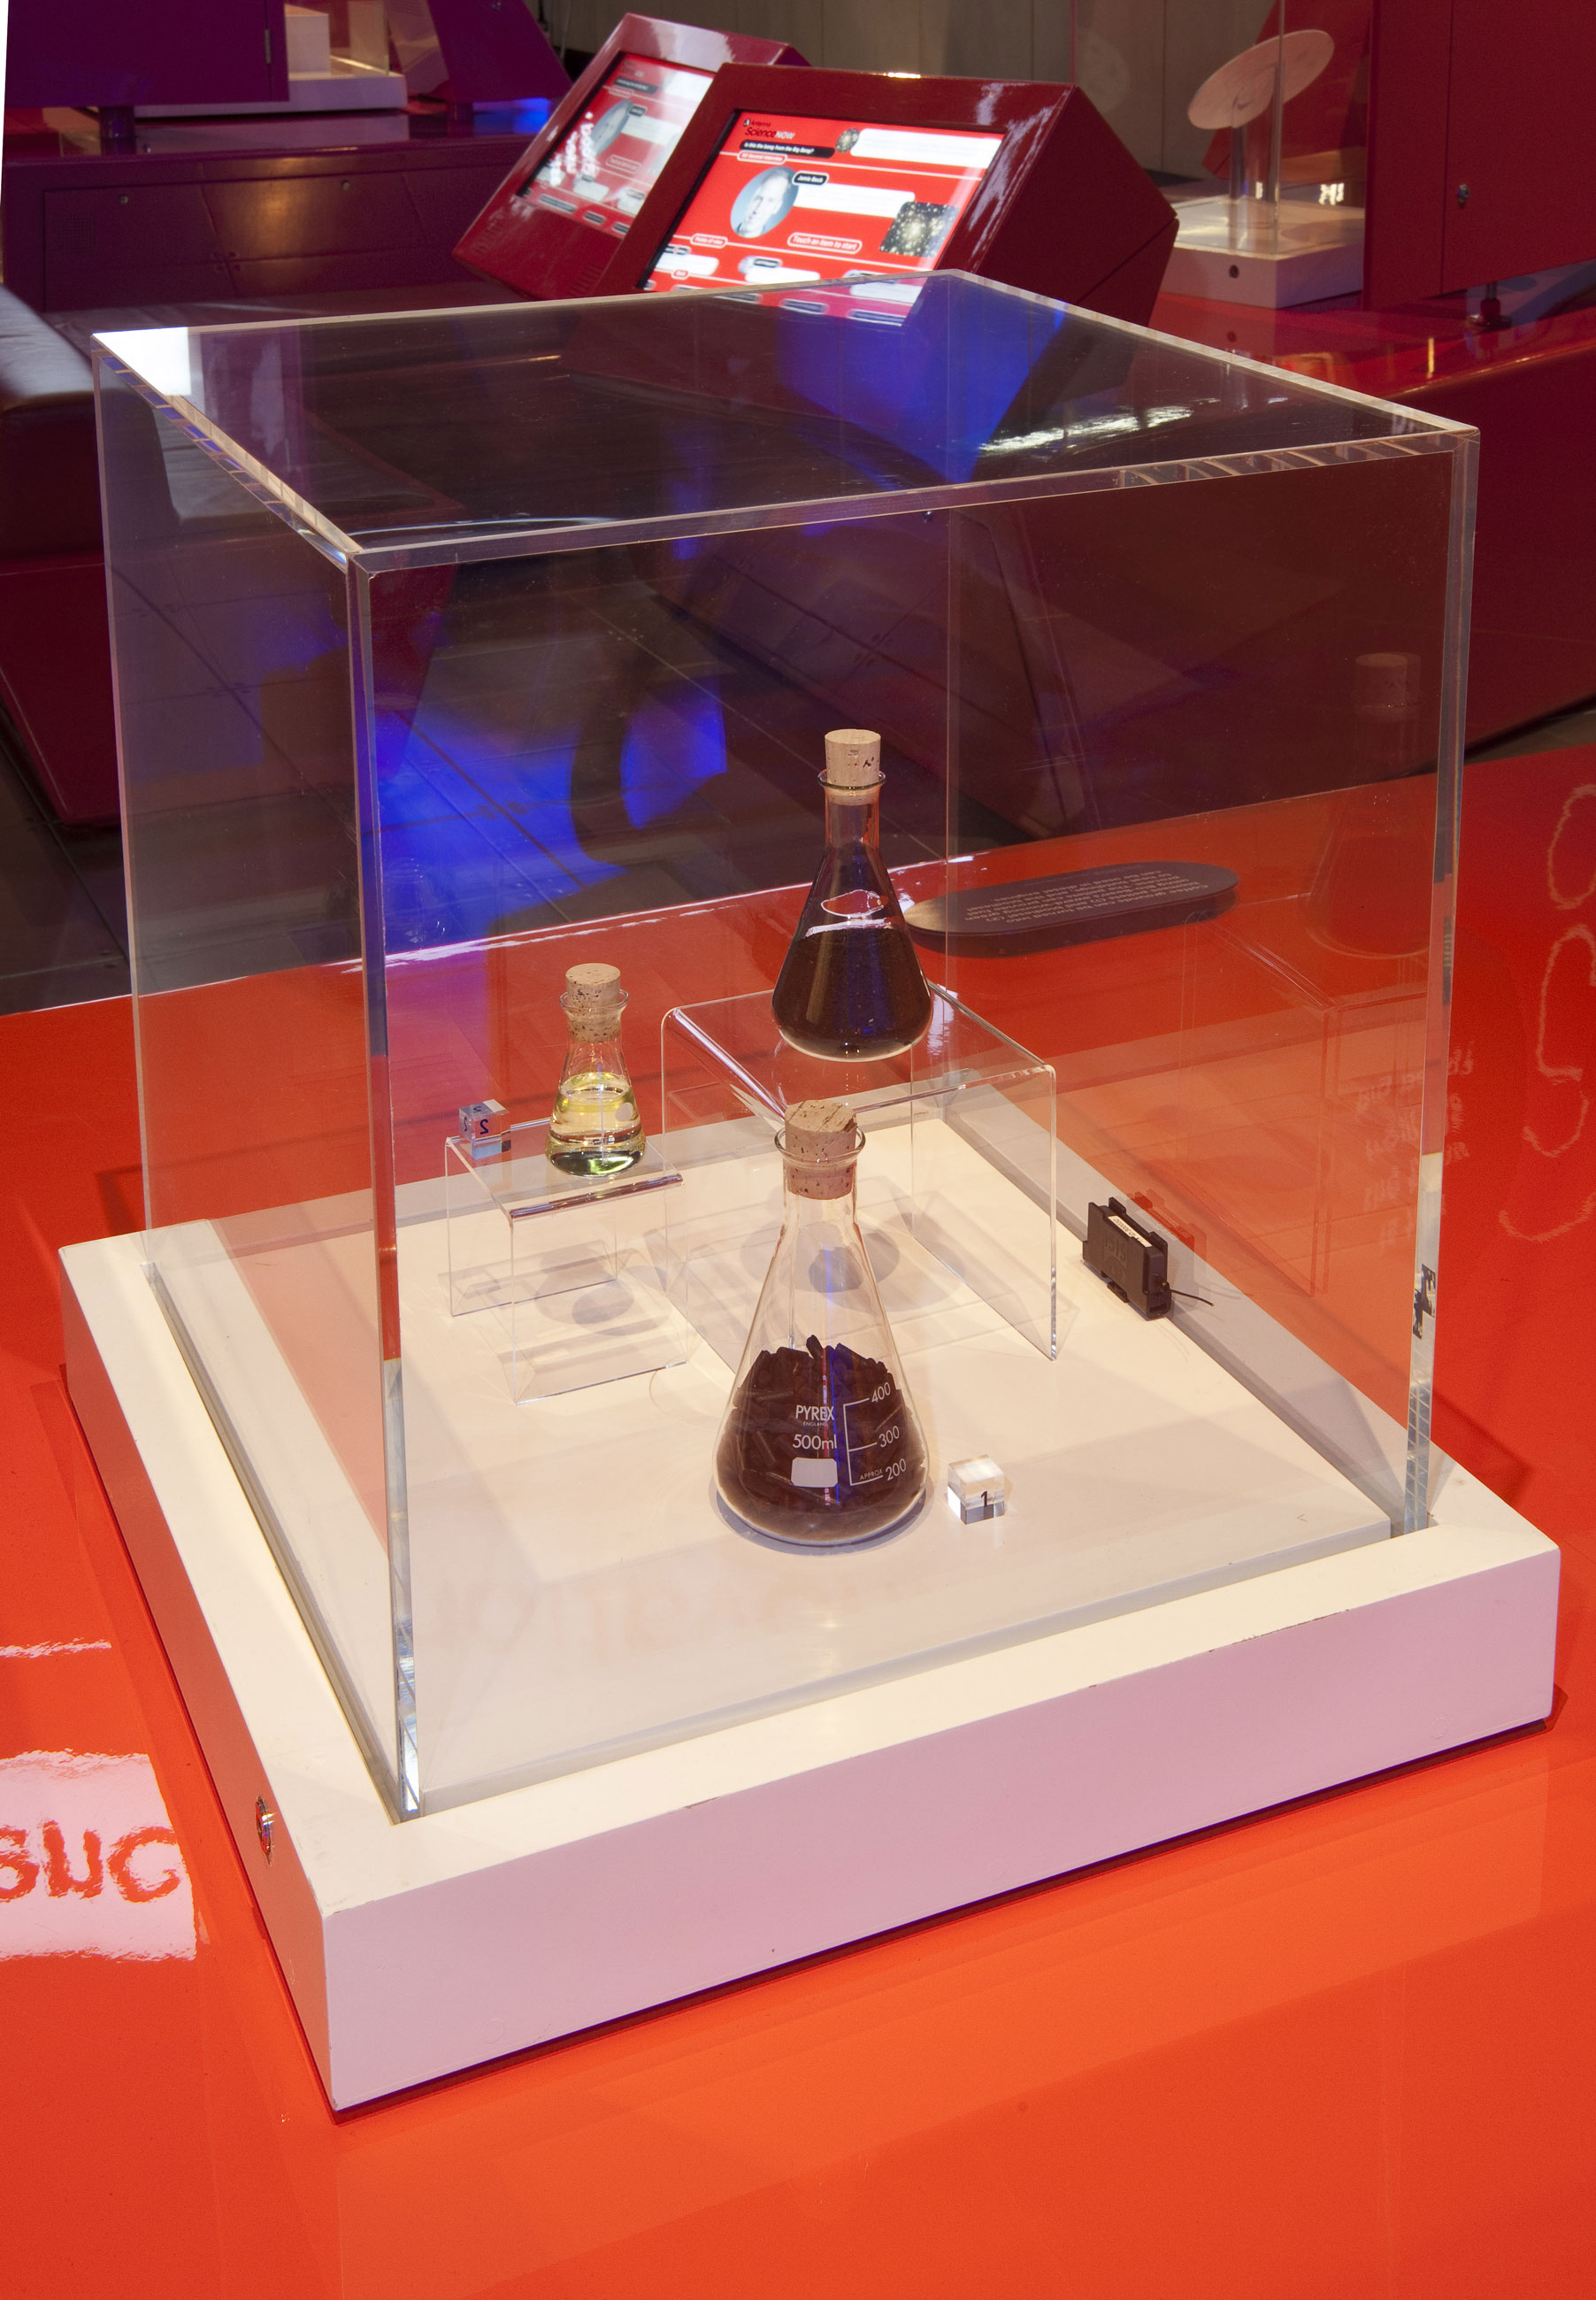 Part of the bio-bean exhibit on display at the Science Museum.